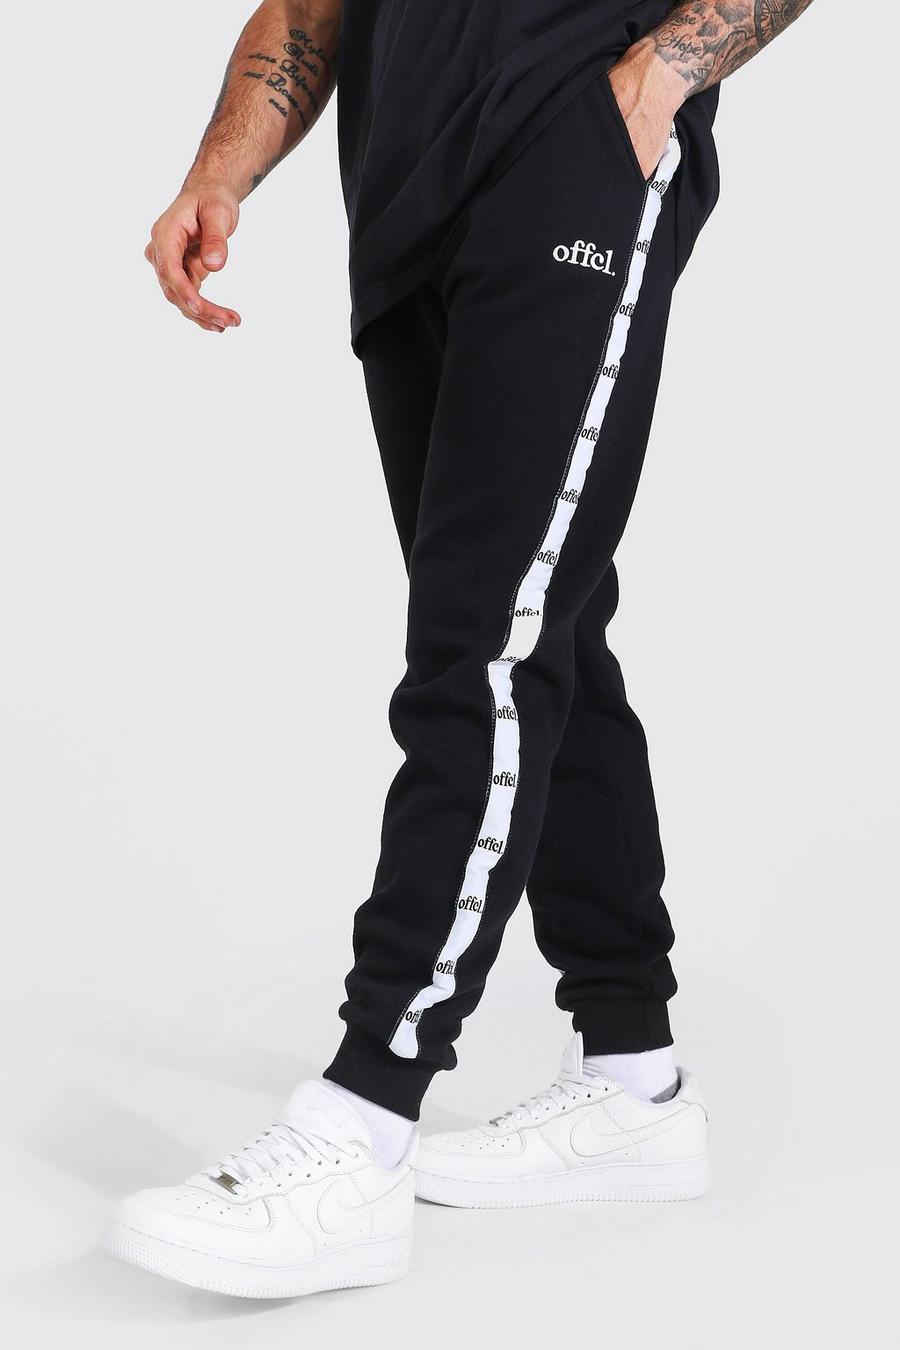 Black Regular Fit Joggers With Offcl Side Tape image number 1